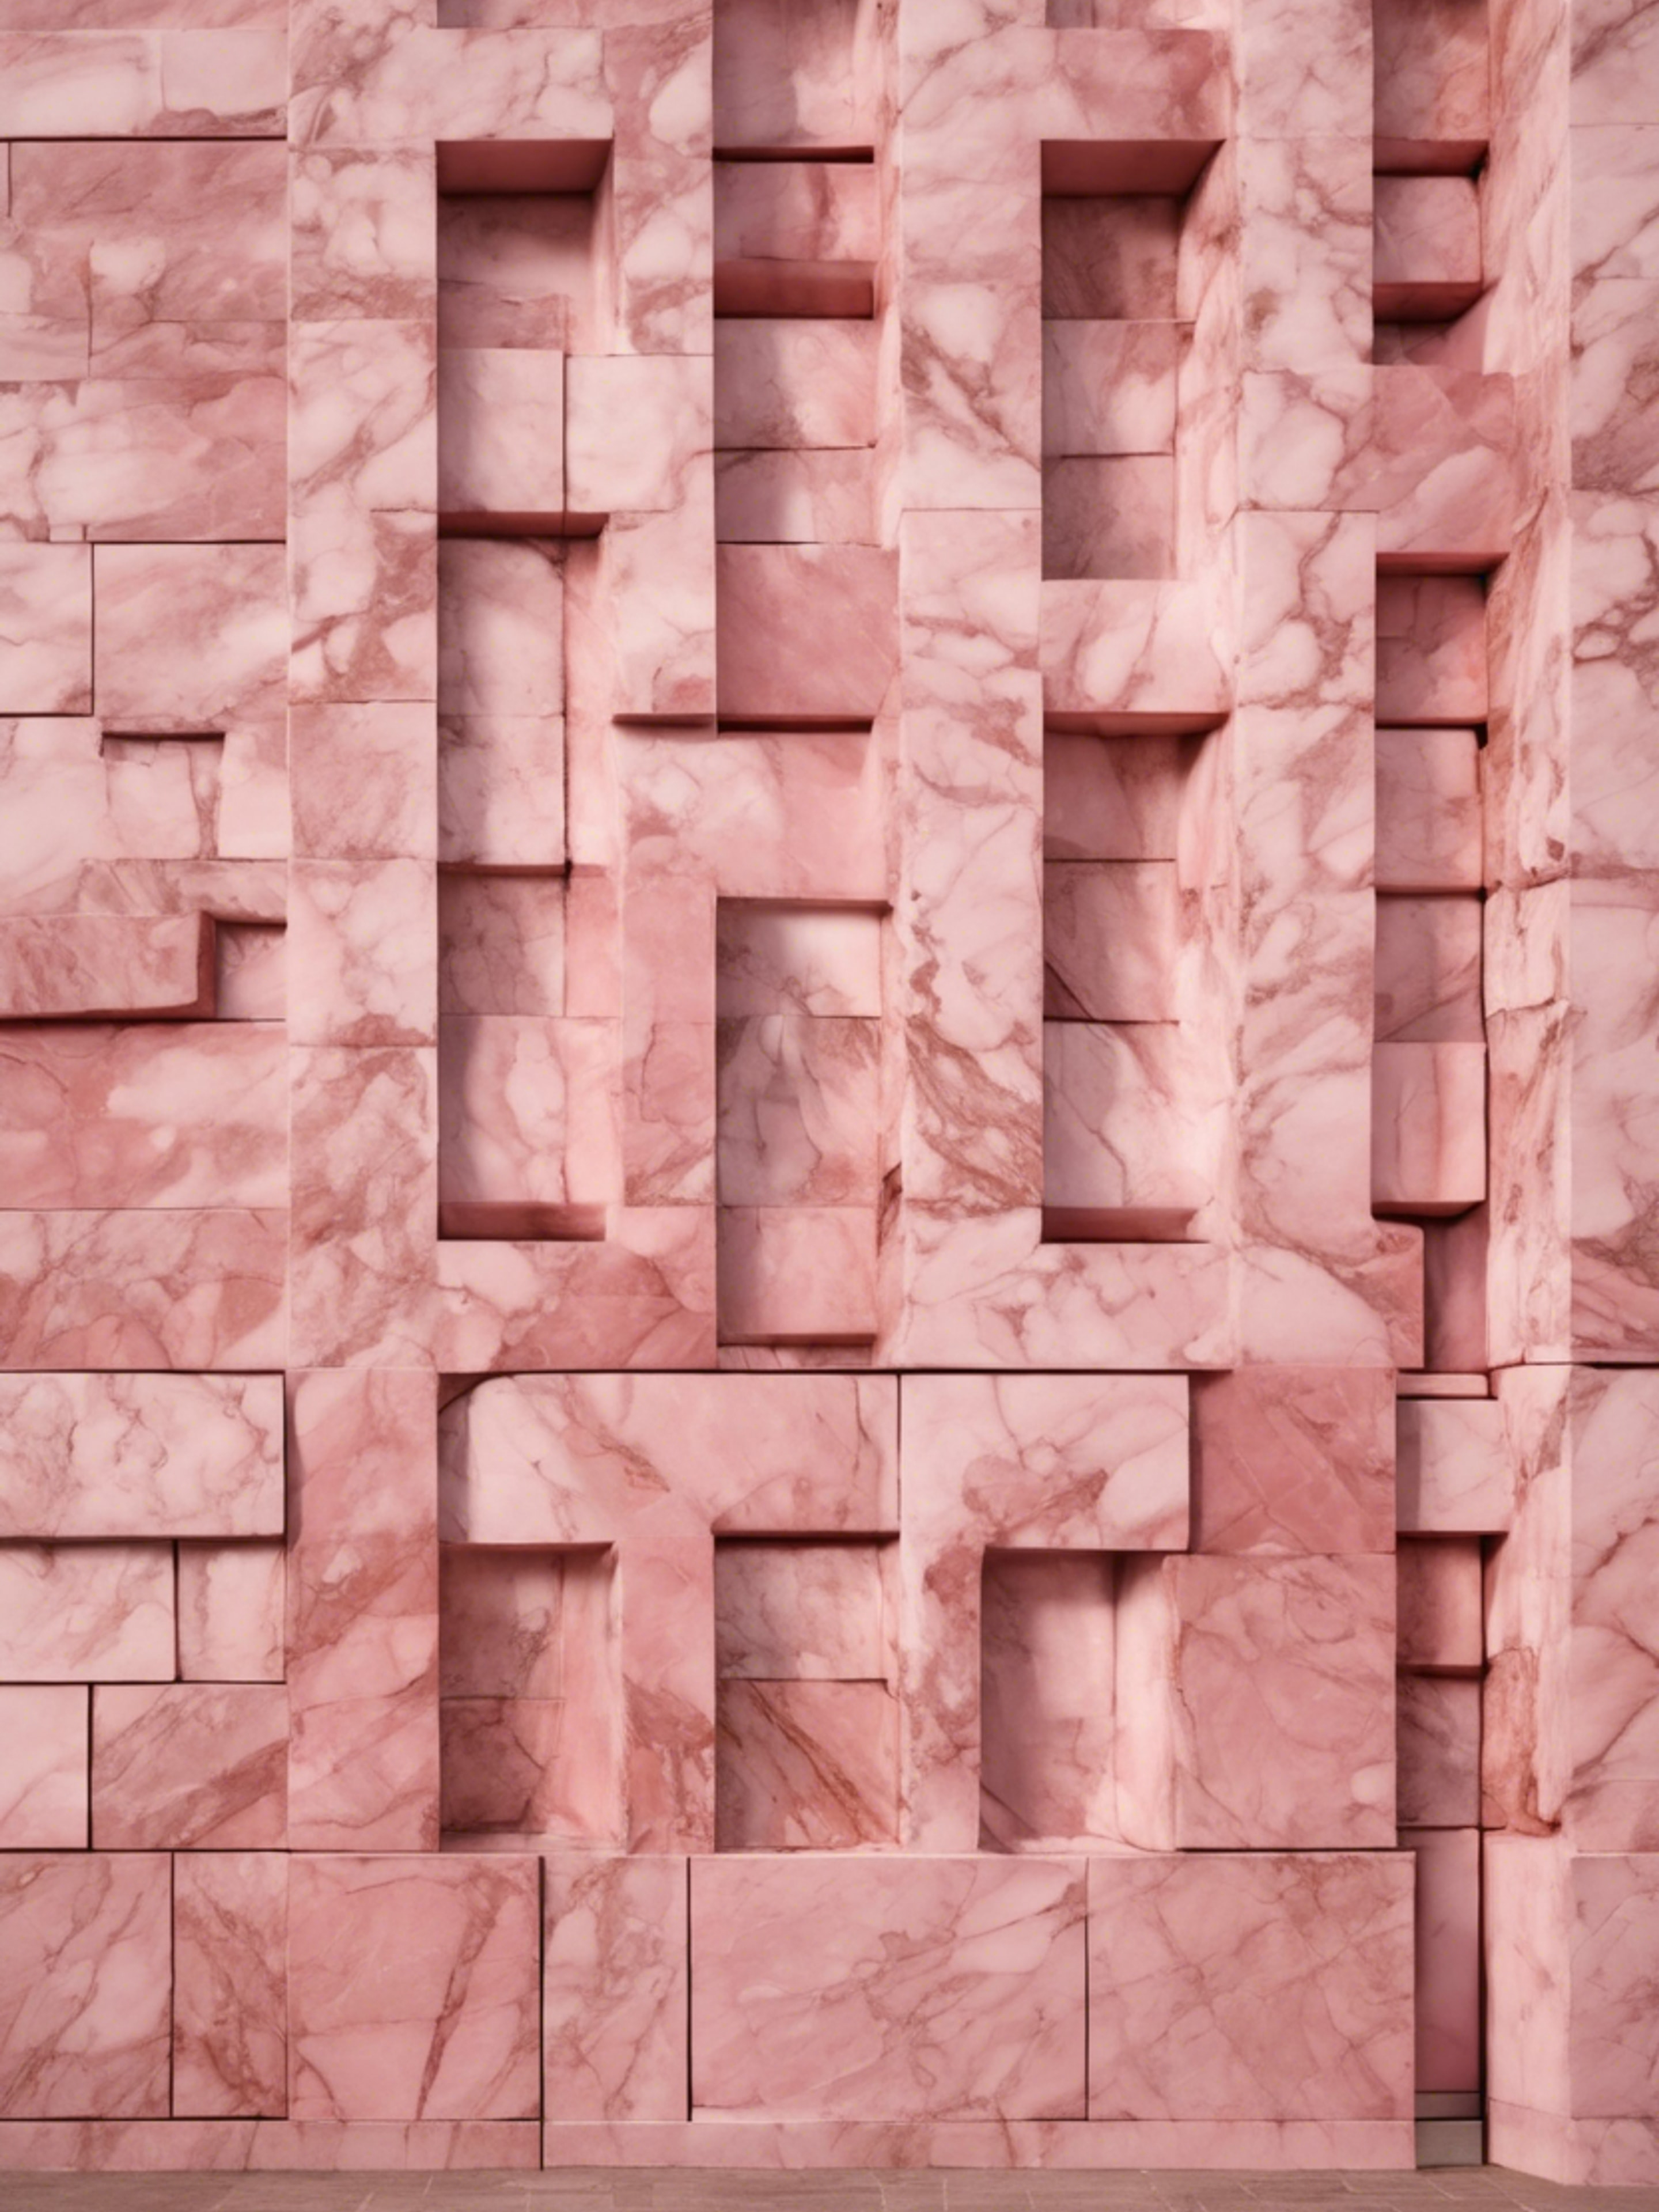 An outdoor wall of a building, made of polished pink marble. Шпалери[24255f95efd34f59a019]